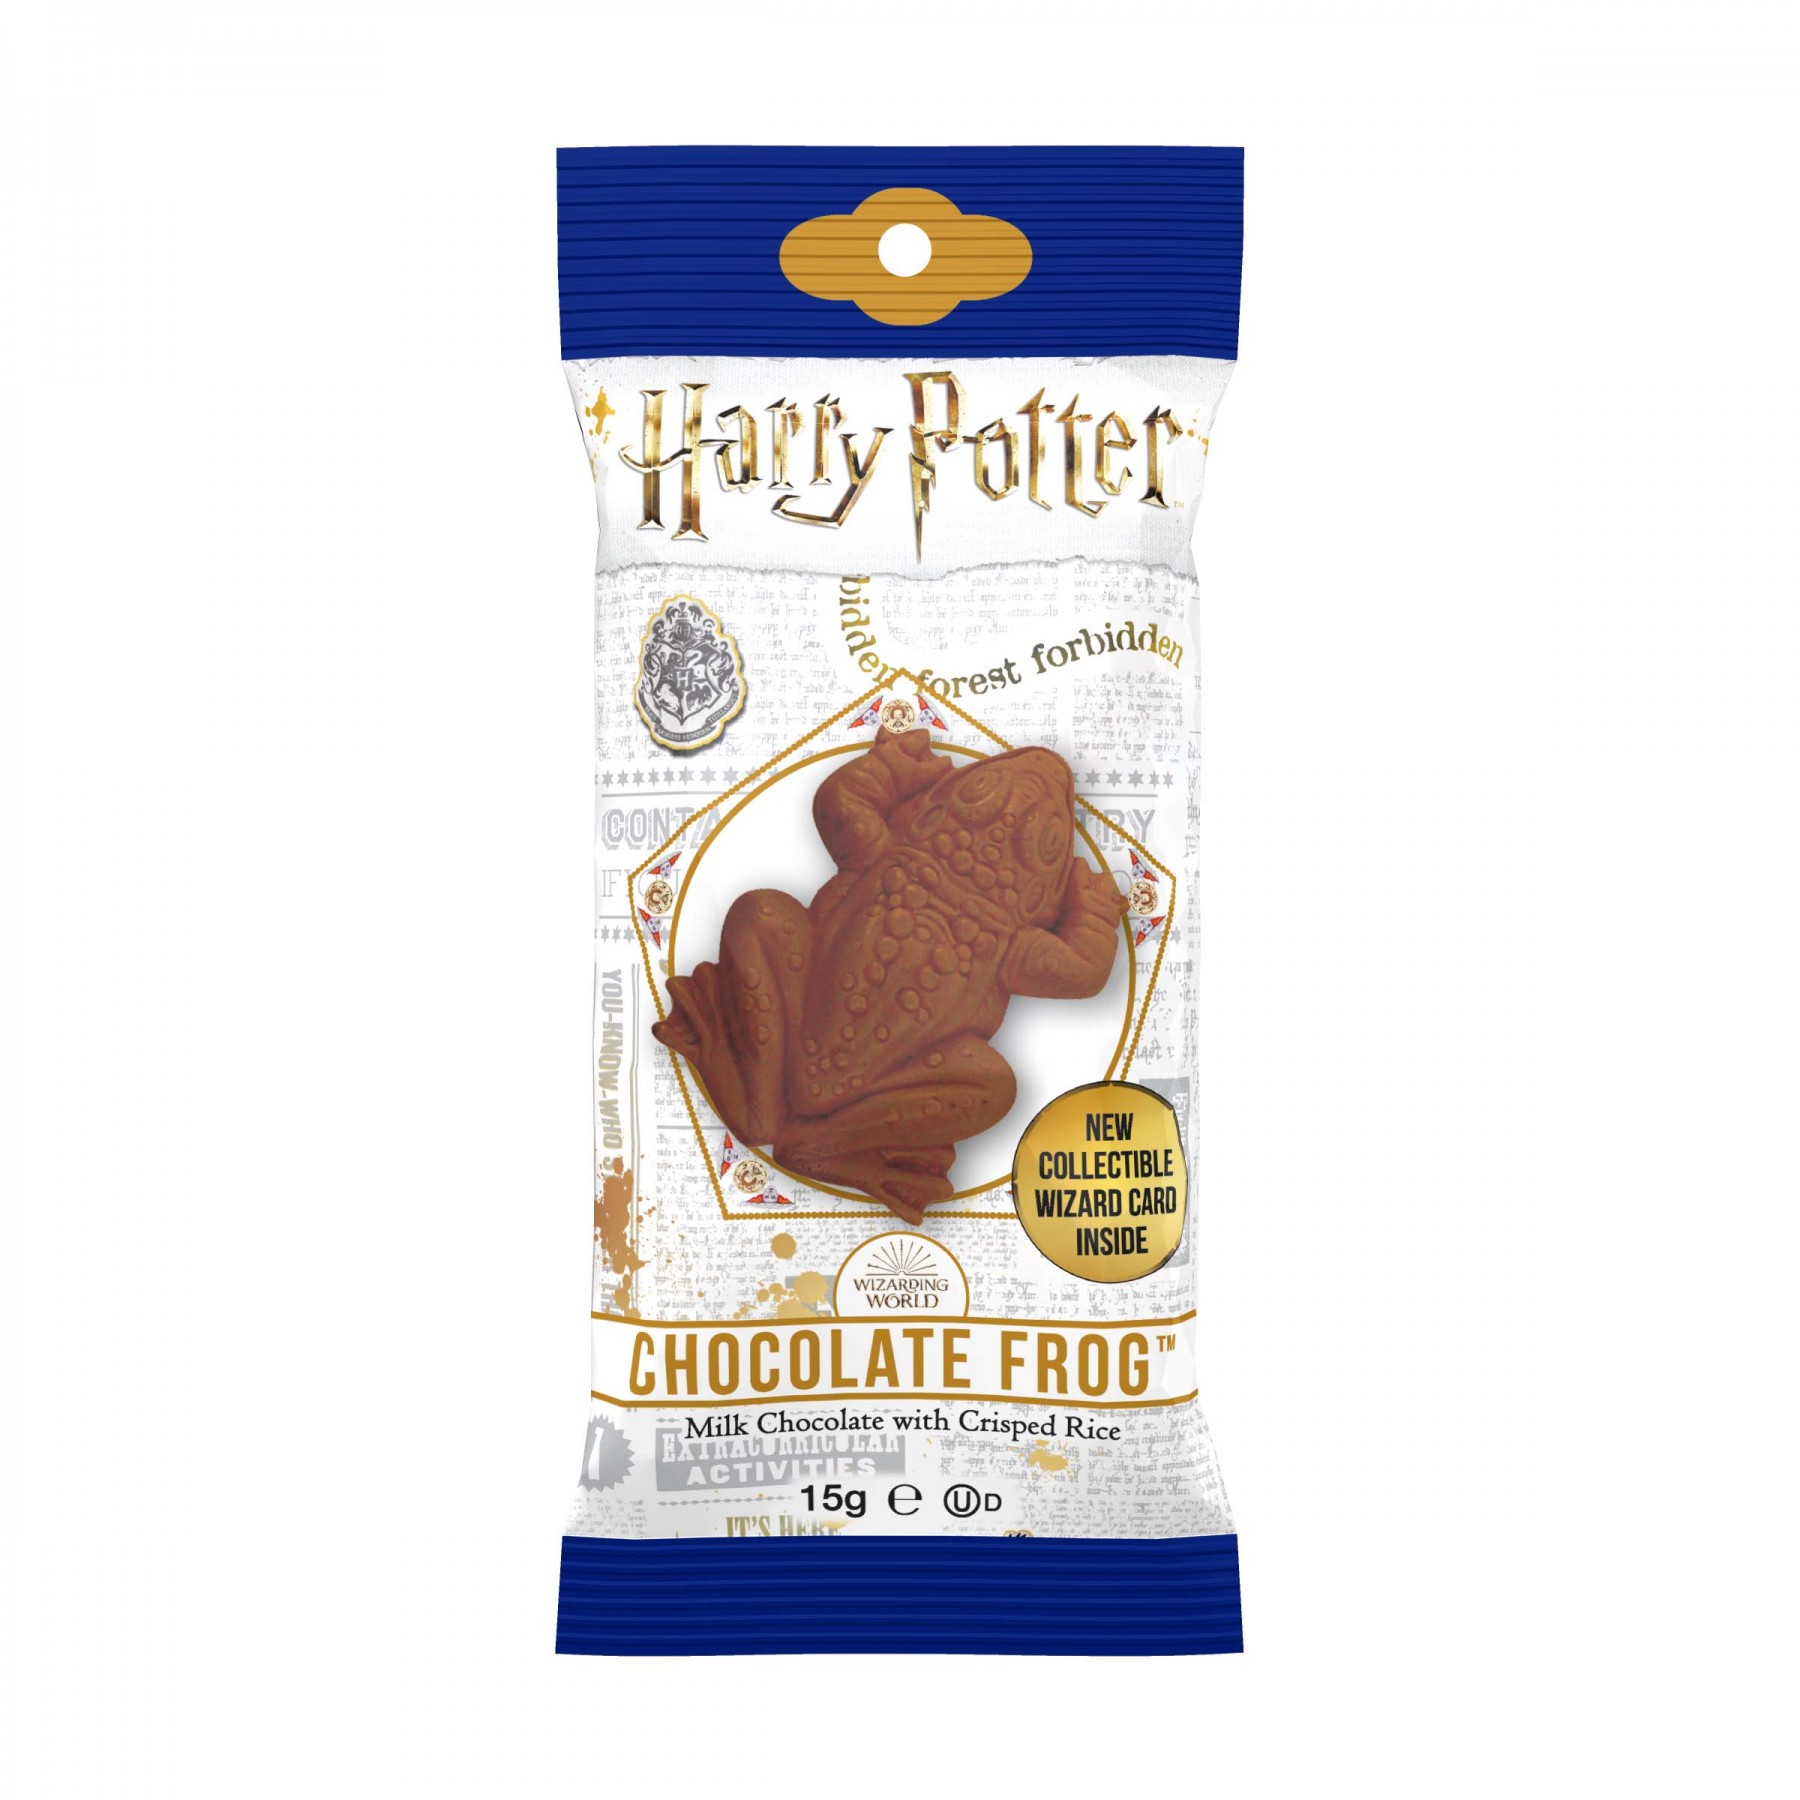 Harry Potter Milk Chocolate Frog with Collectable 3d Card